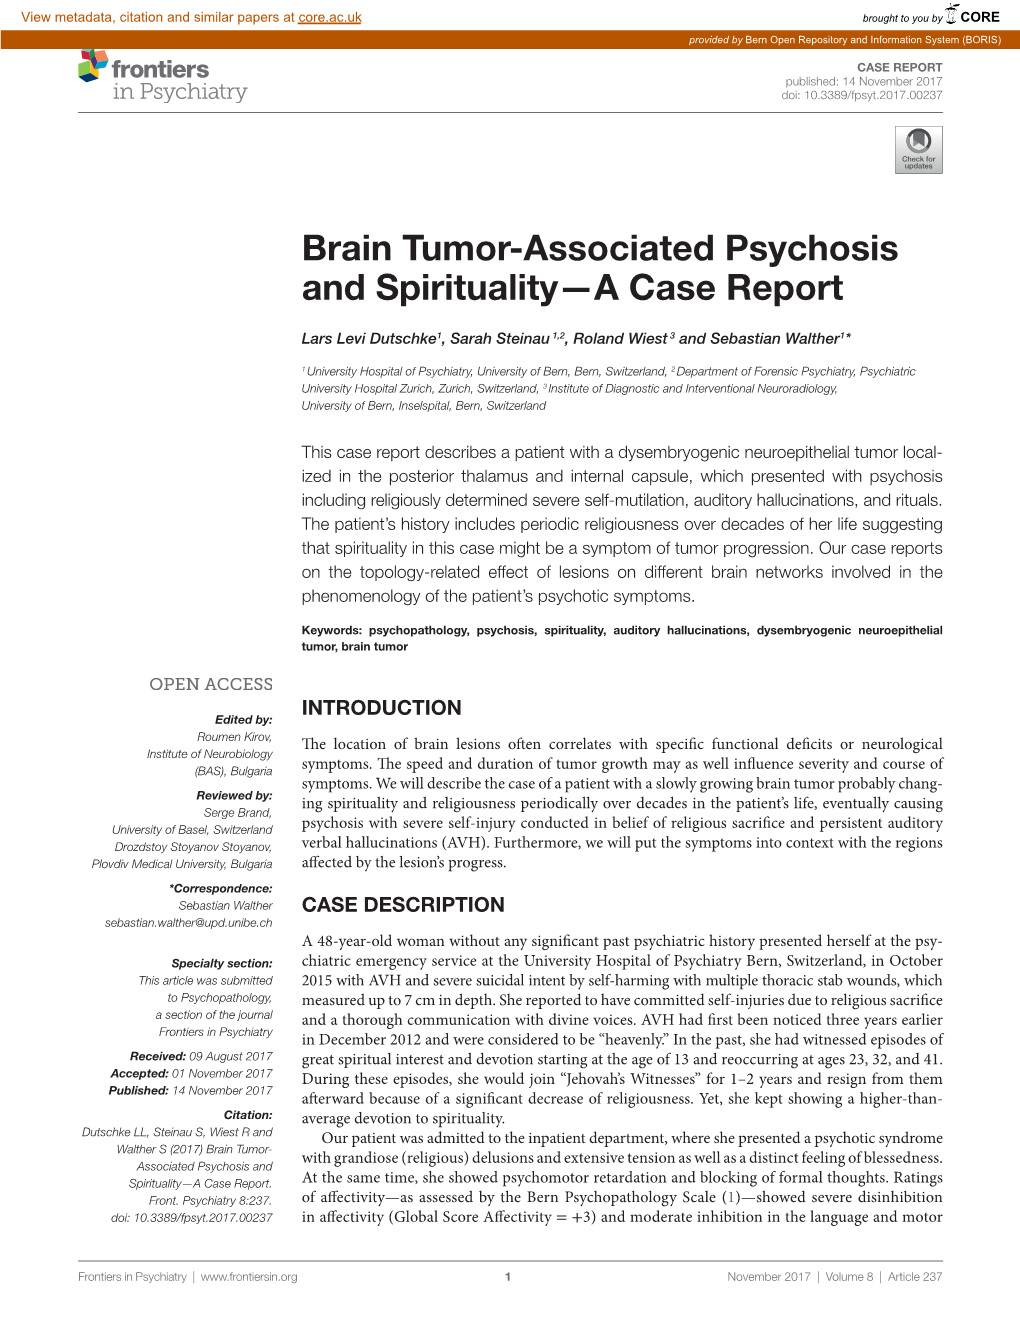 Brain Tumor-Associated Psychosis and Spirituality—A Case Report